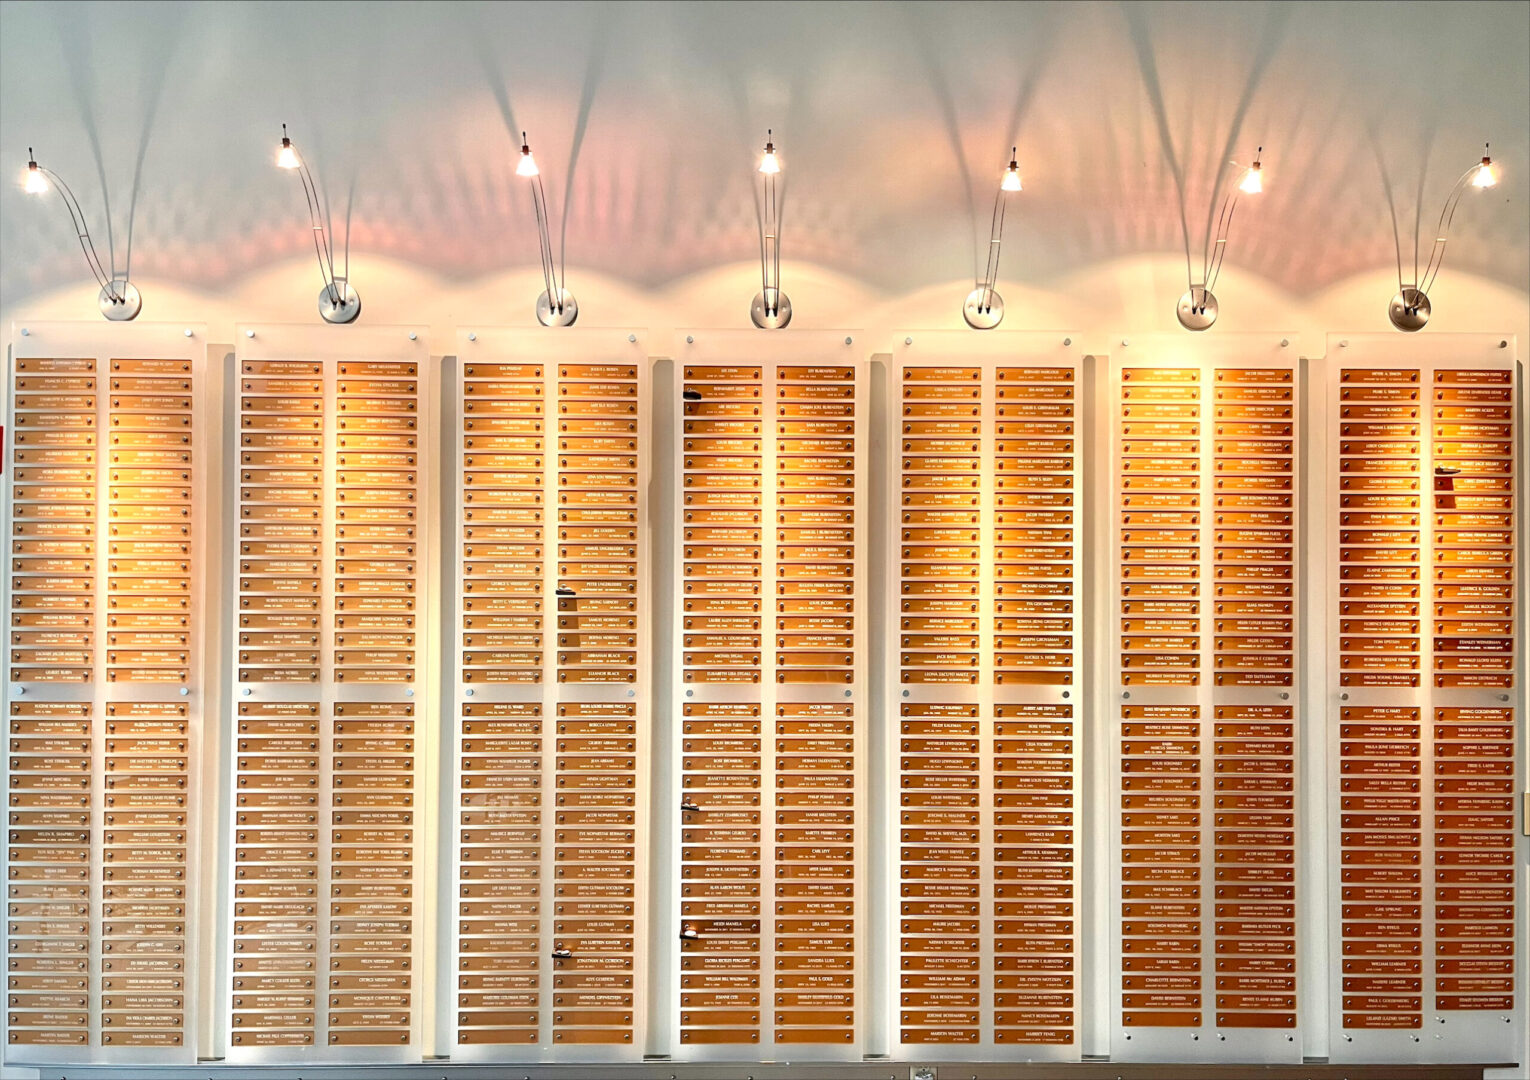 A wall of wooden shelves with lights above them.